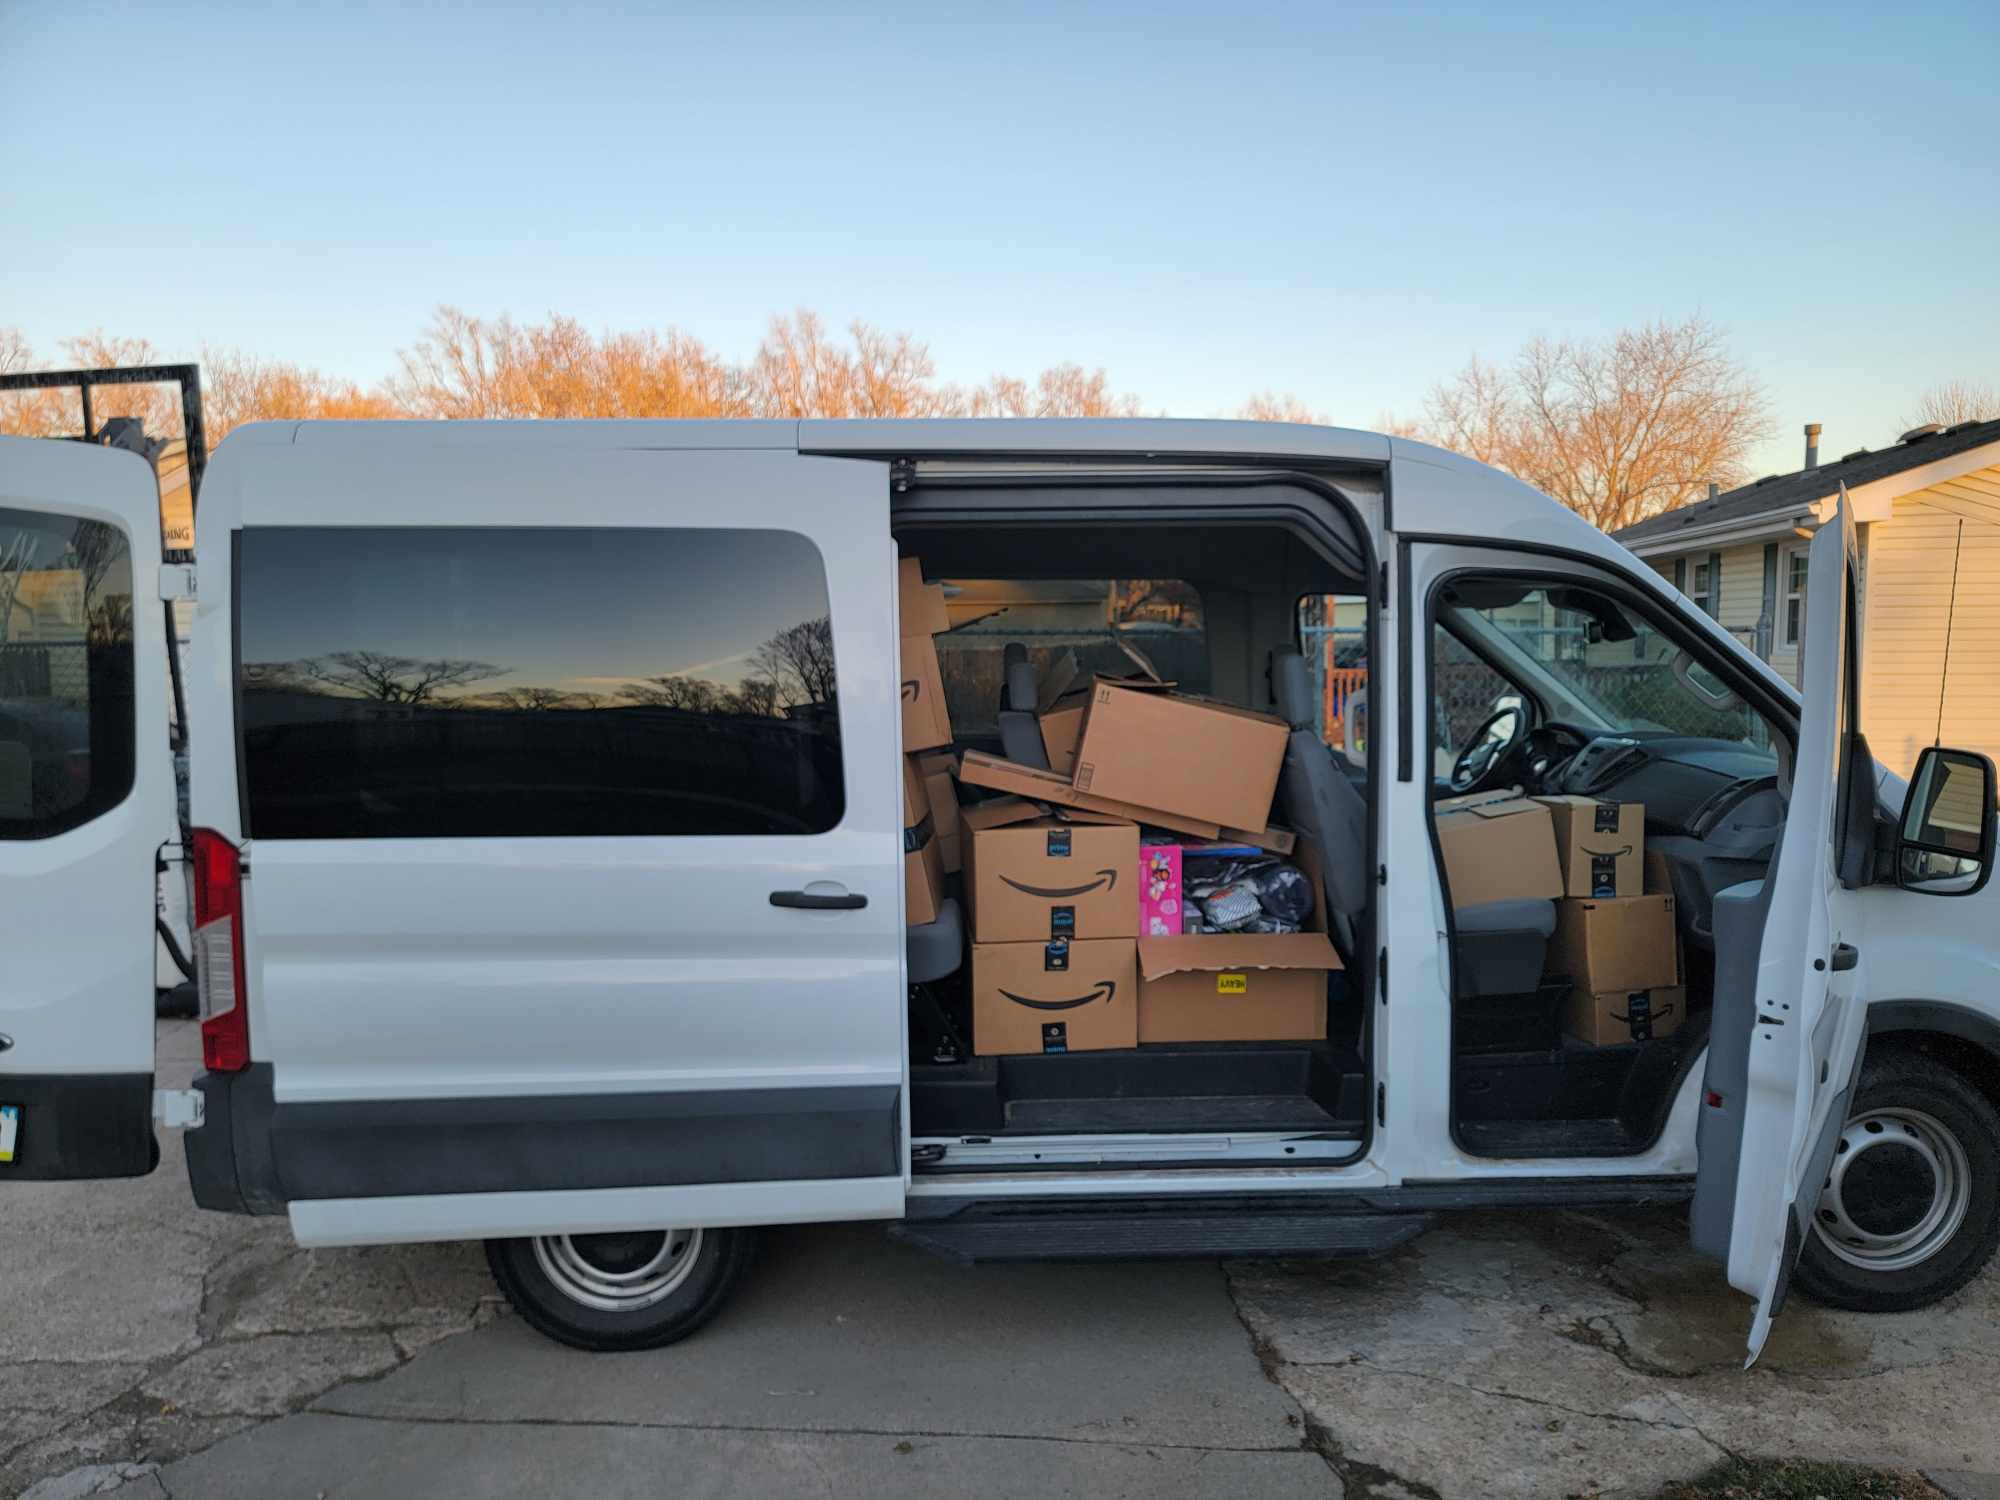 Filling the Van for Adopt-A-School